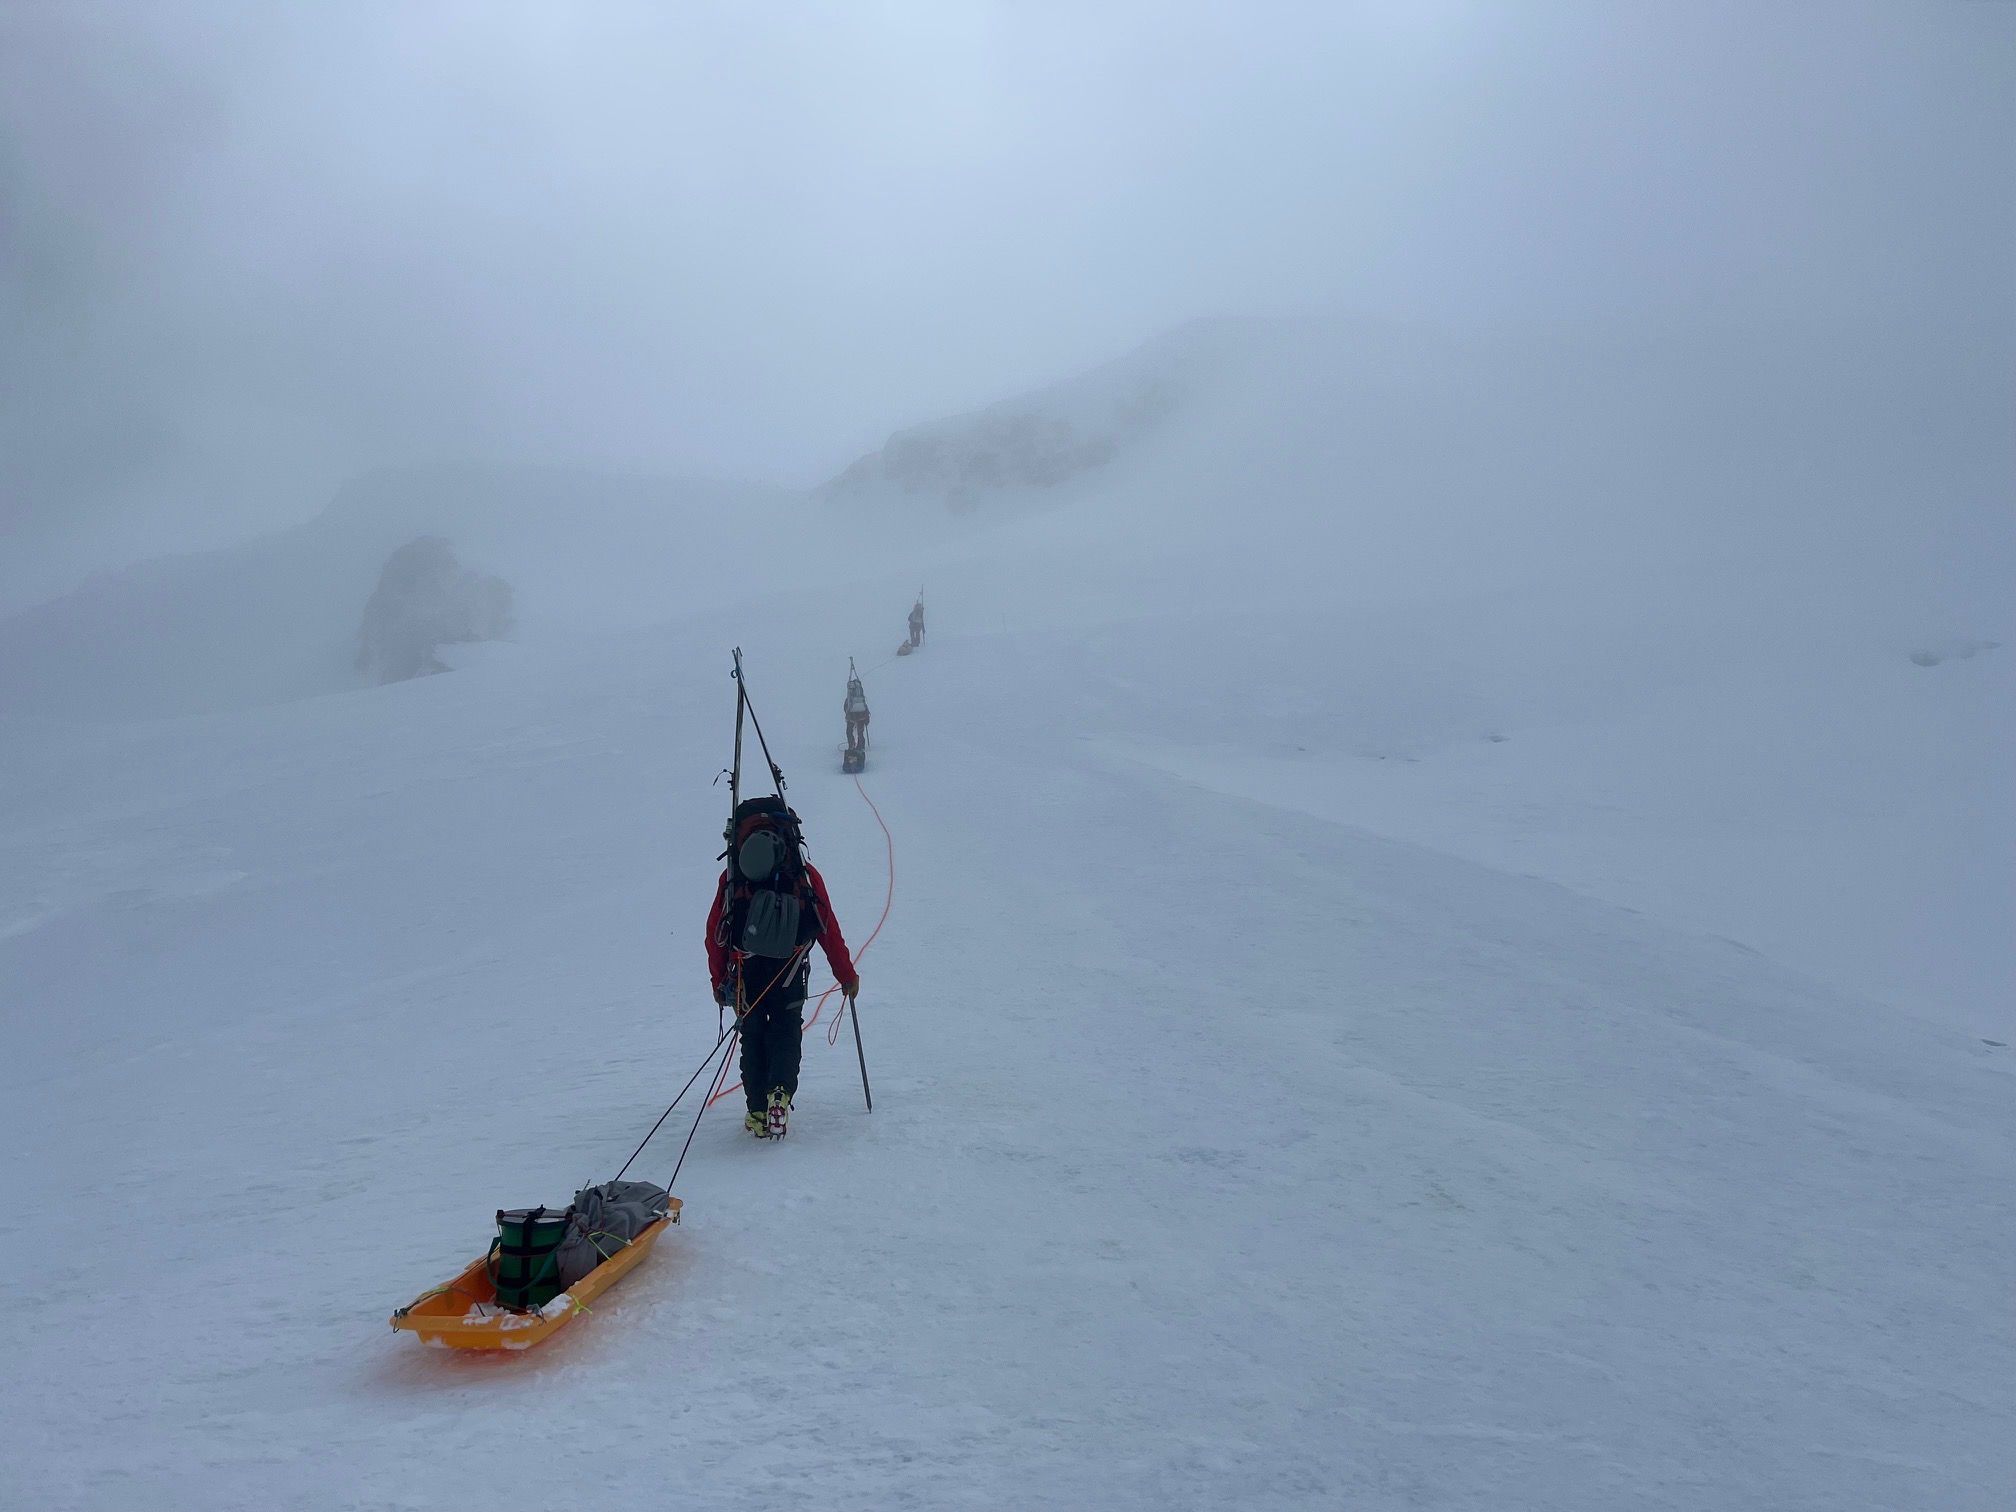 A roped team of climbers pulling sleds moves along a snowy trail in flat light and thin cloud cover